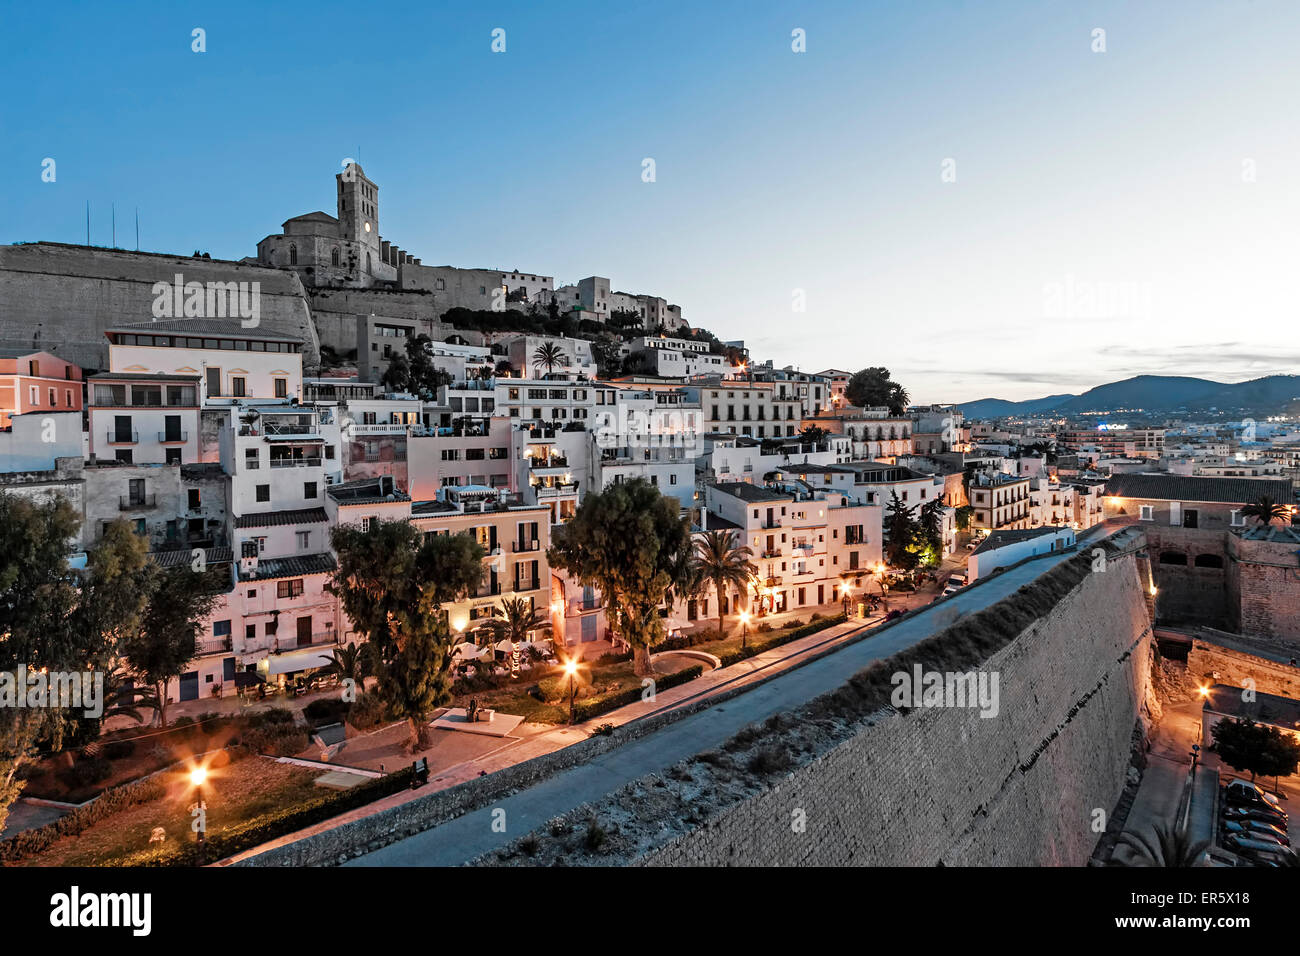 Sunset over the old town and fortress, Dalt vila, Ibiza, Balearic Islands, Spain Stock Photo